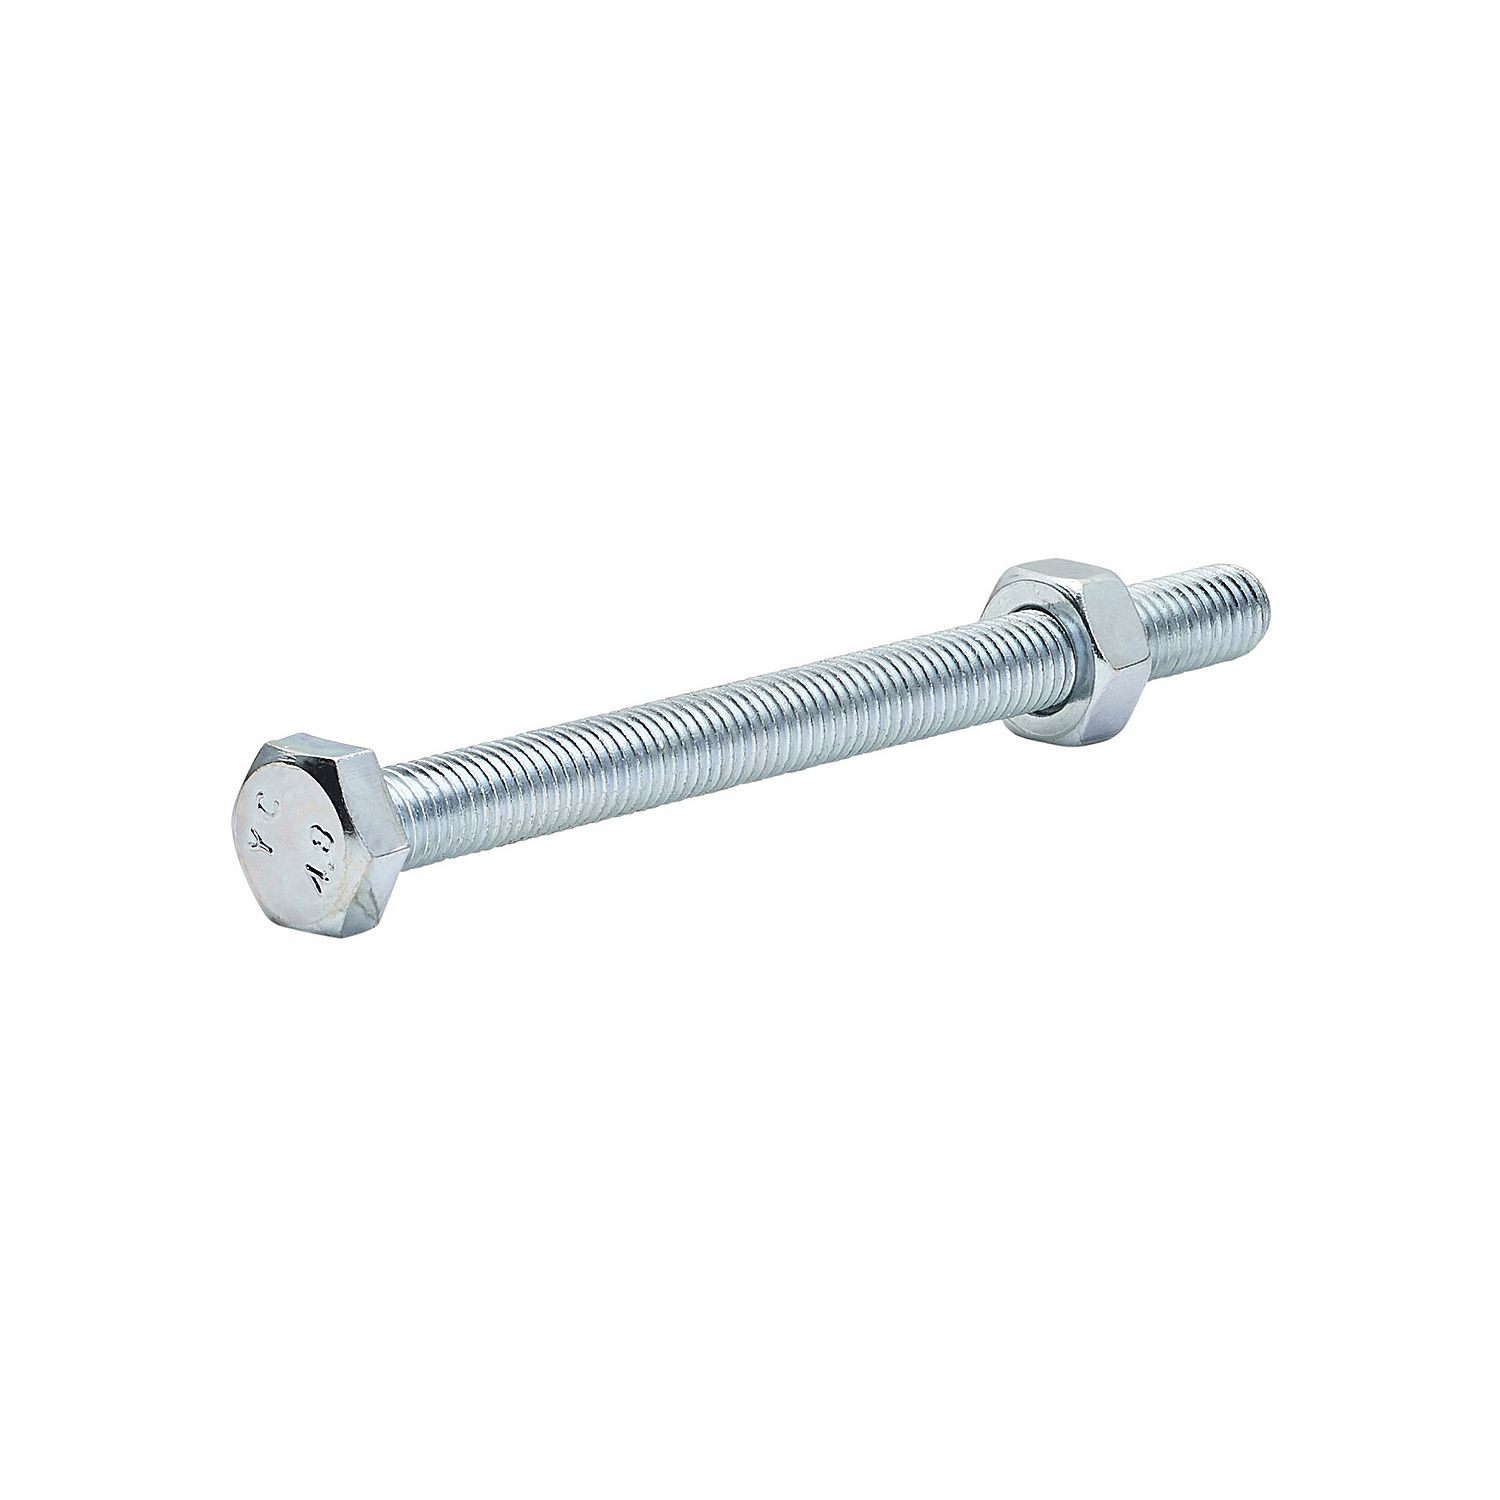 Diall M10 Hex Carbon steel (grade 5.8) Bolt & nut (L)120mm, Pack of 10